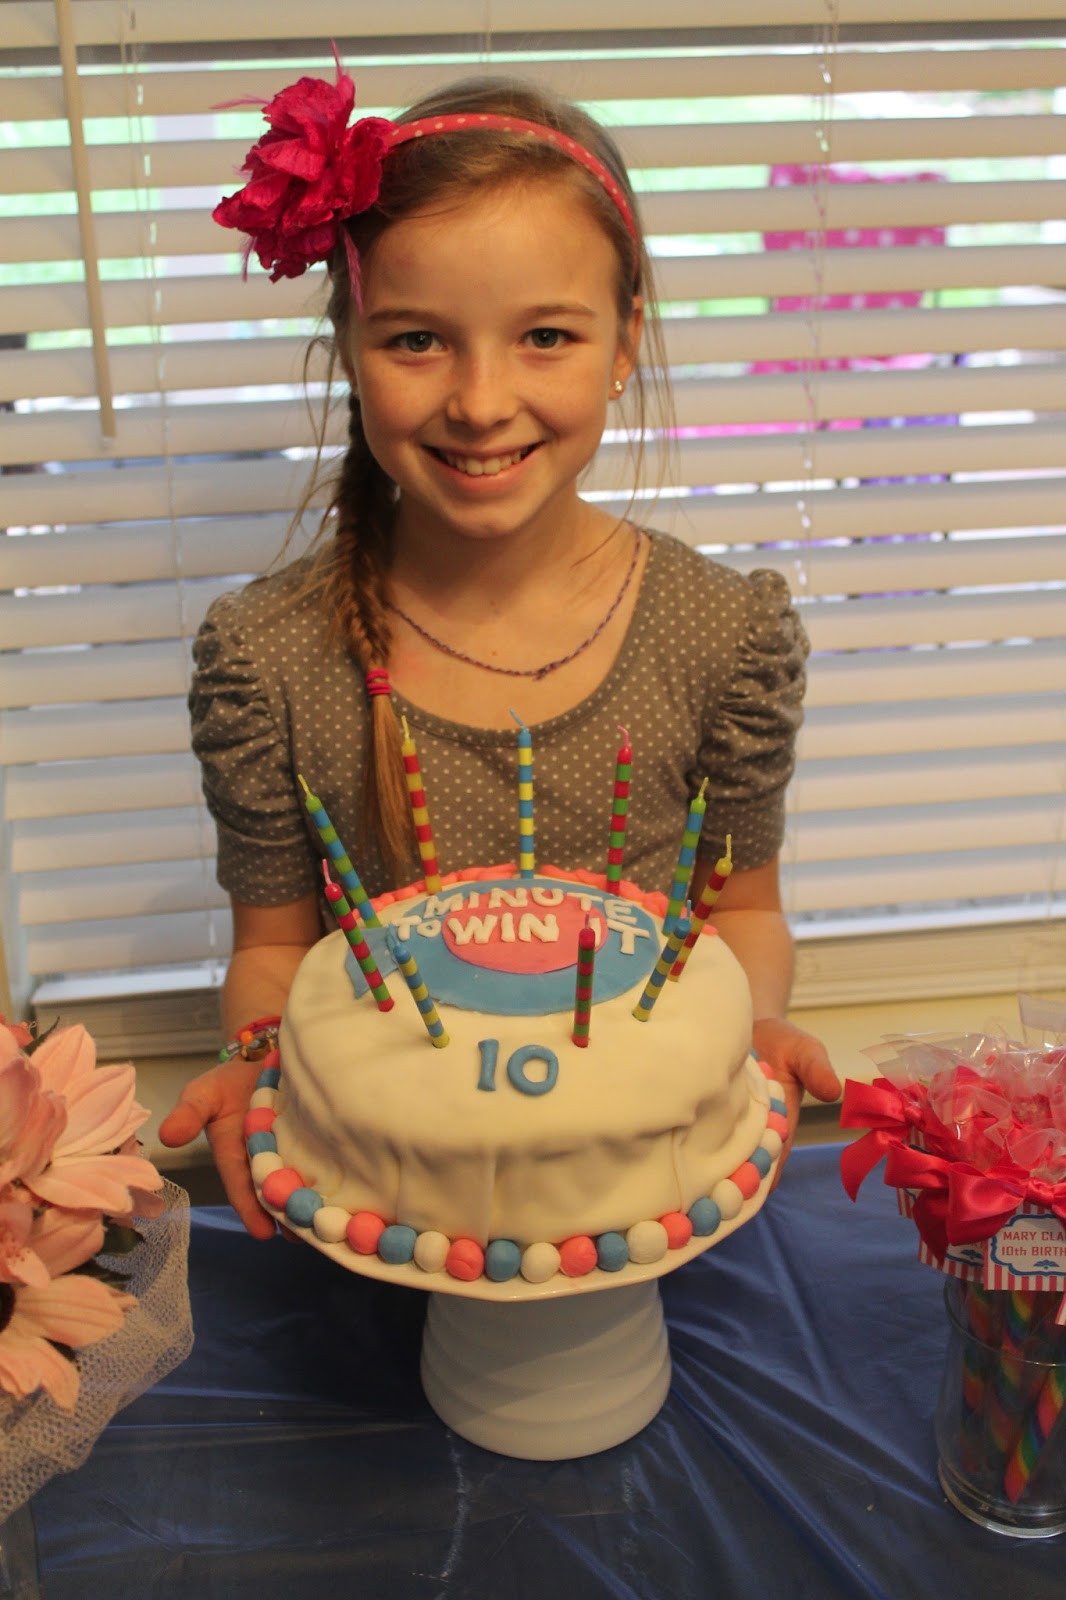 Fun Birthday Party Ideas For 10 Year Olds
 Blair s Blessings 10 Year Old Minute to Win It Birthday Party